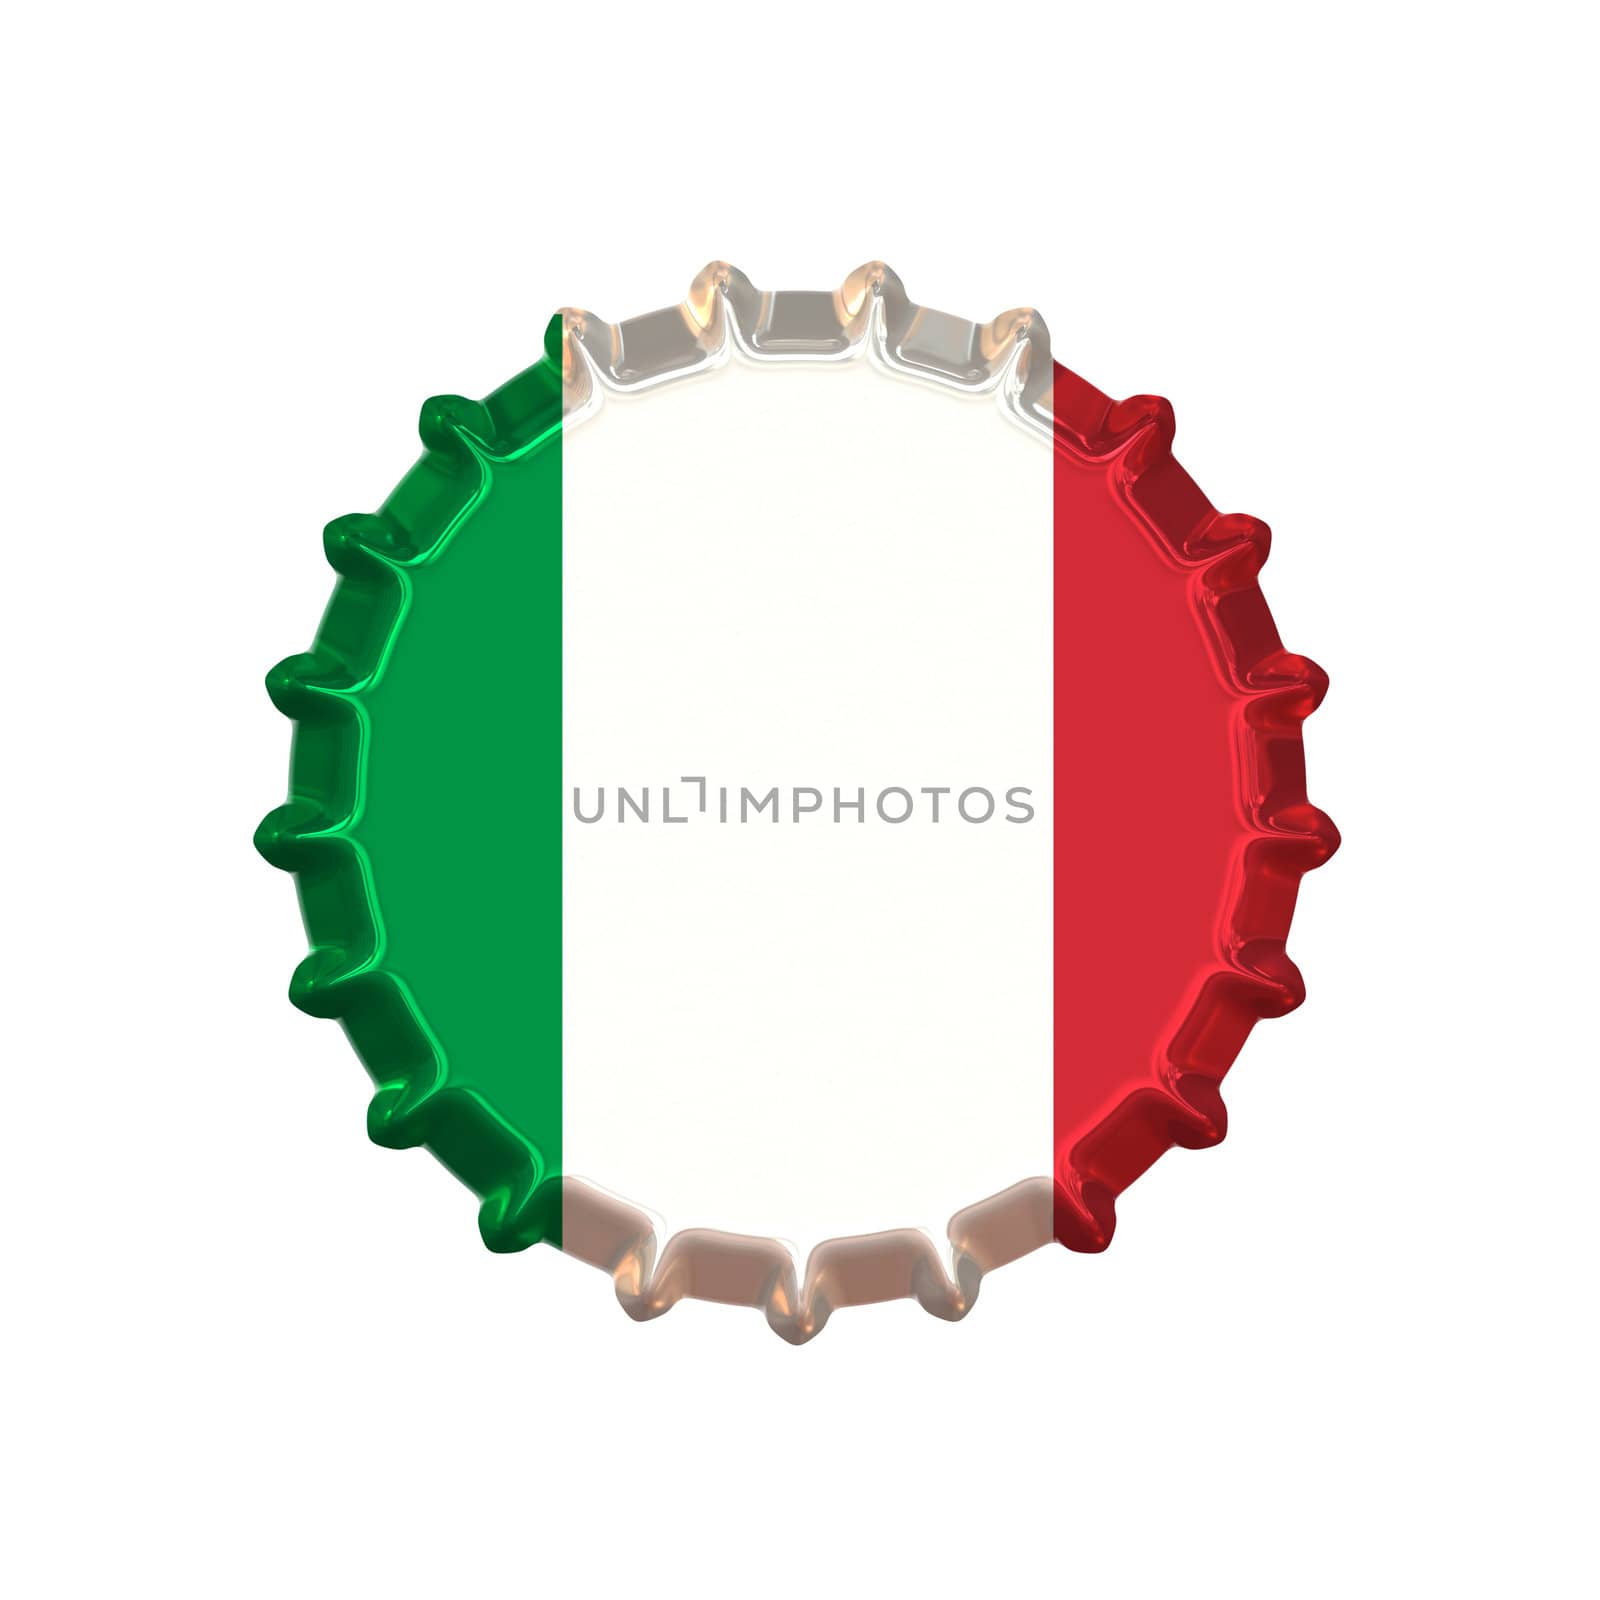 An illustration of a bottle cap with a country sign Italy